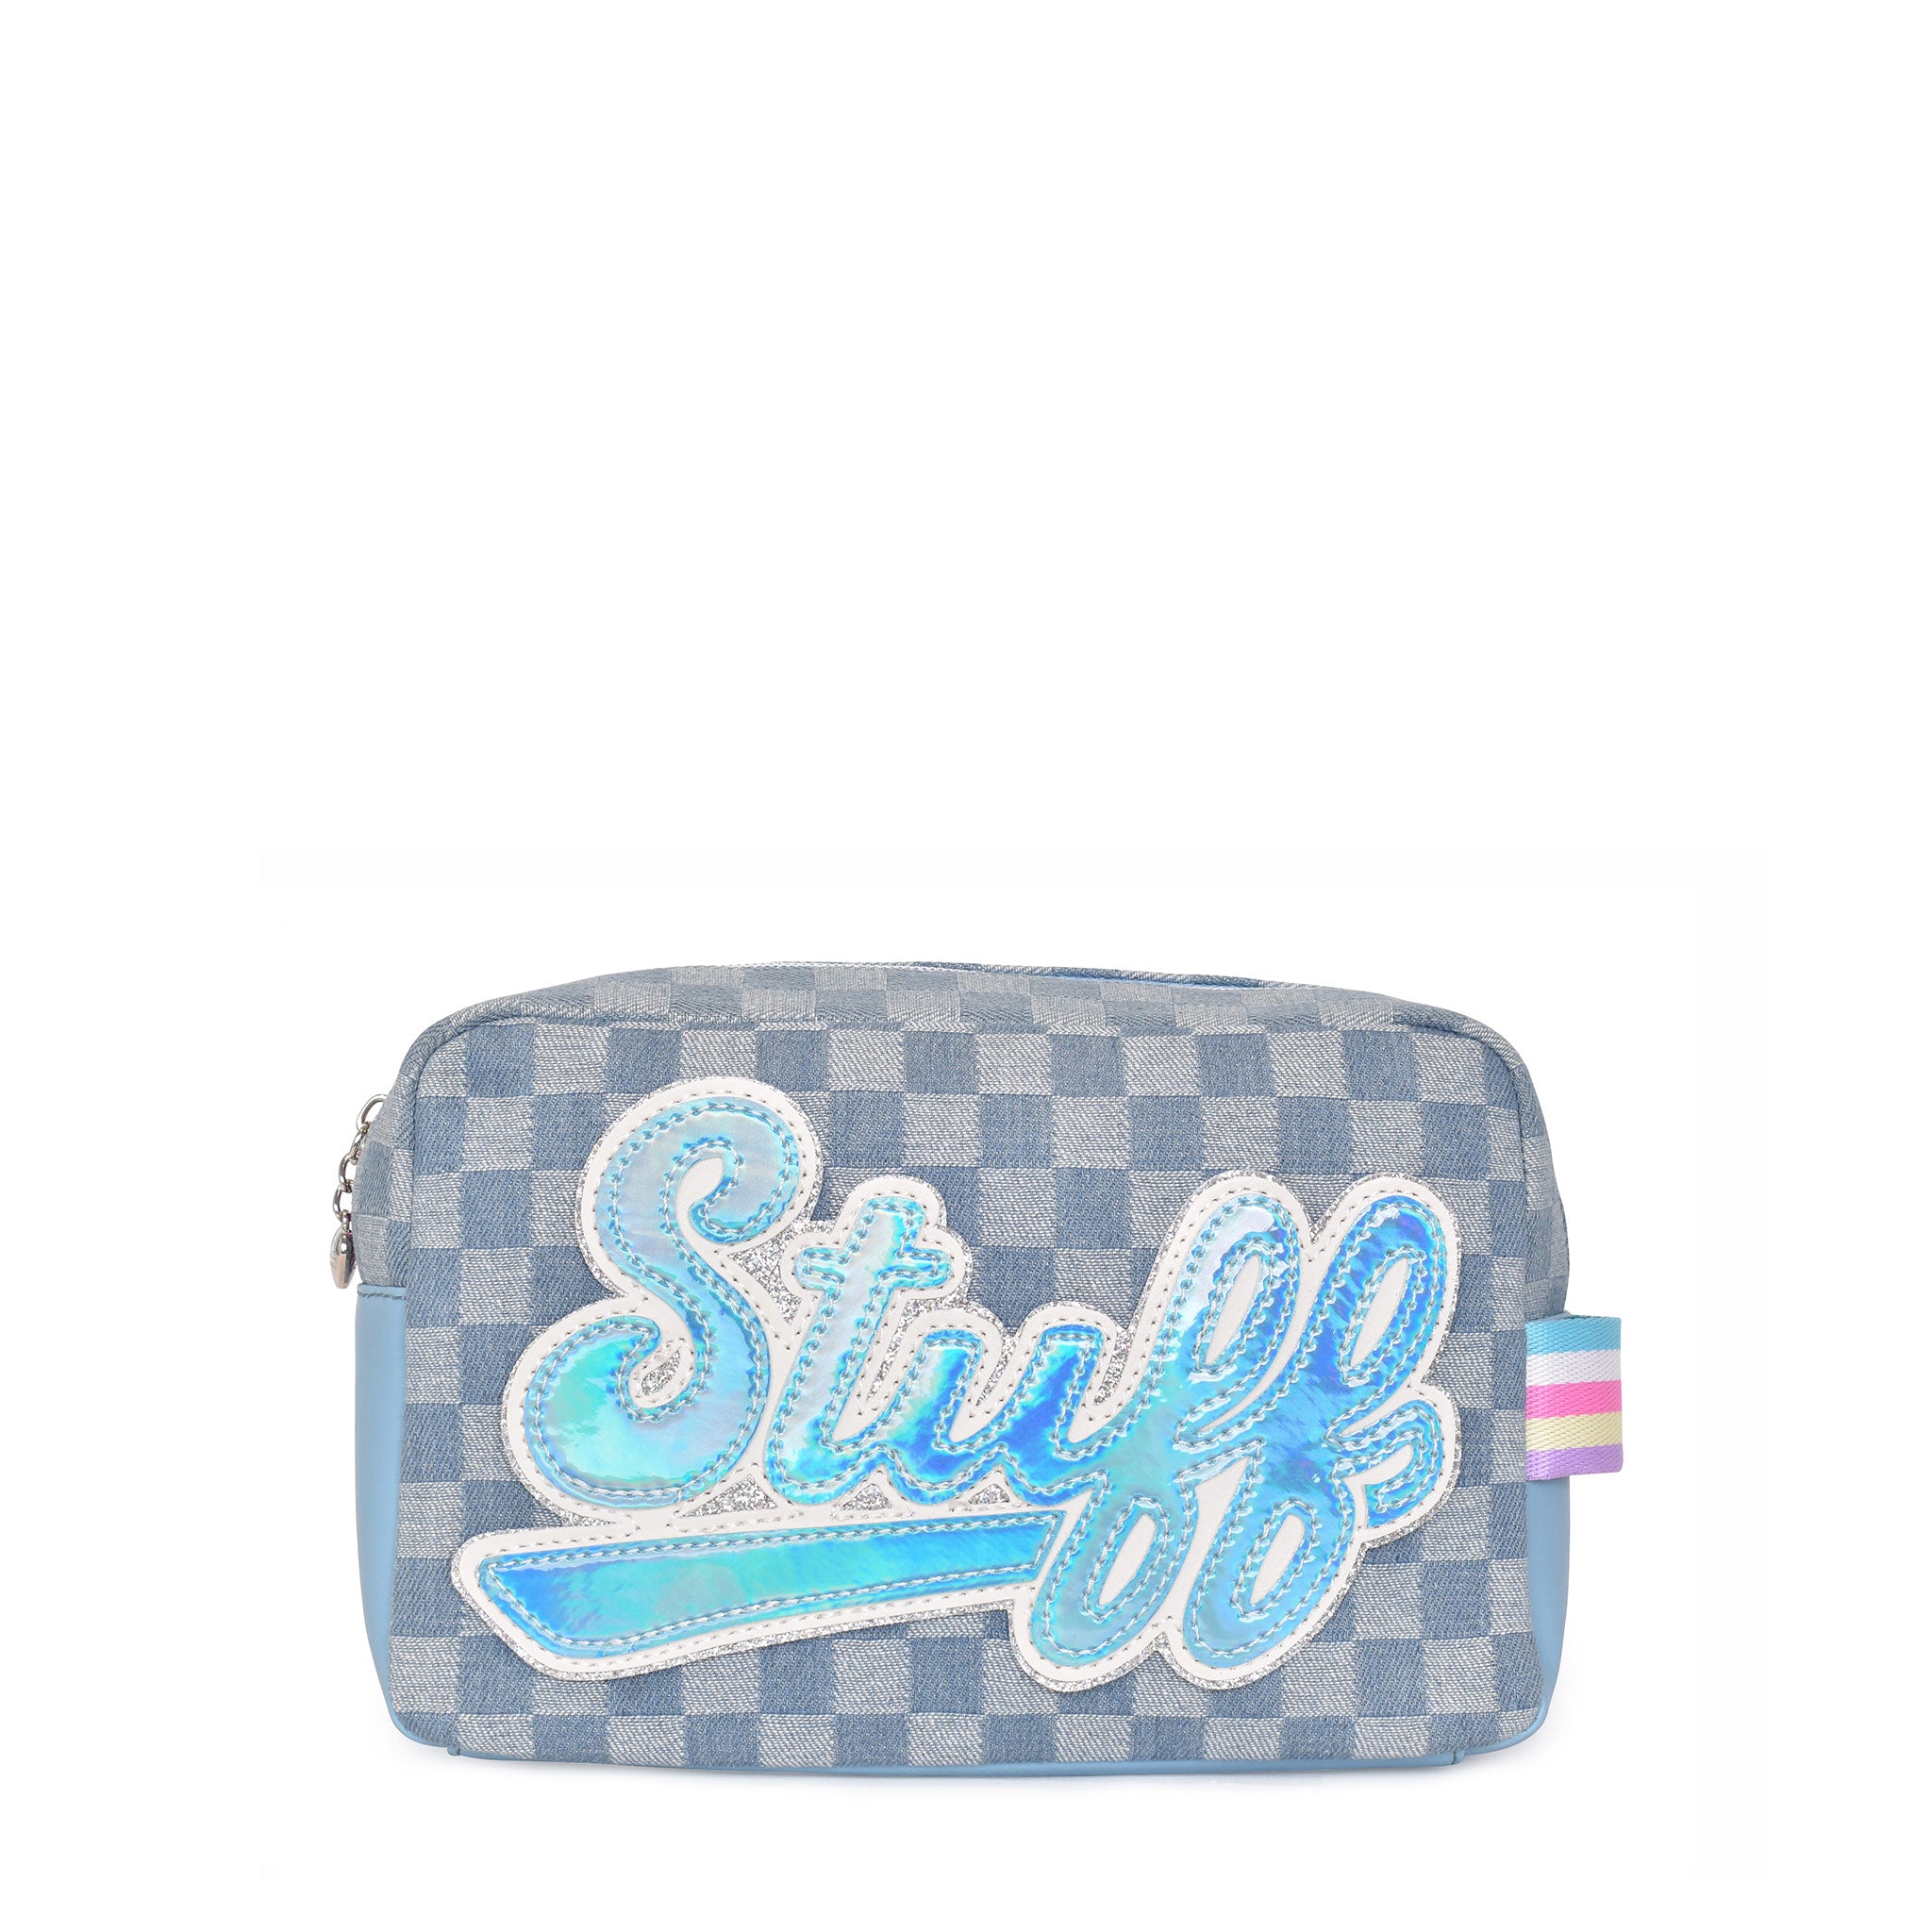 Front view of a denim checkerboard printed pouch with script varsity letters 'STUFF' appliqué